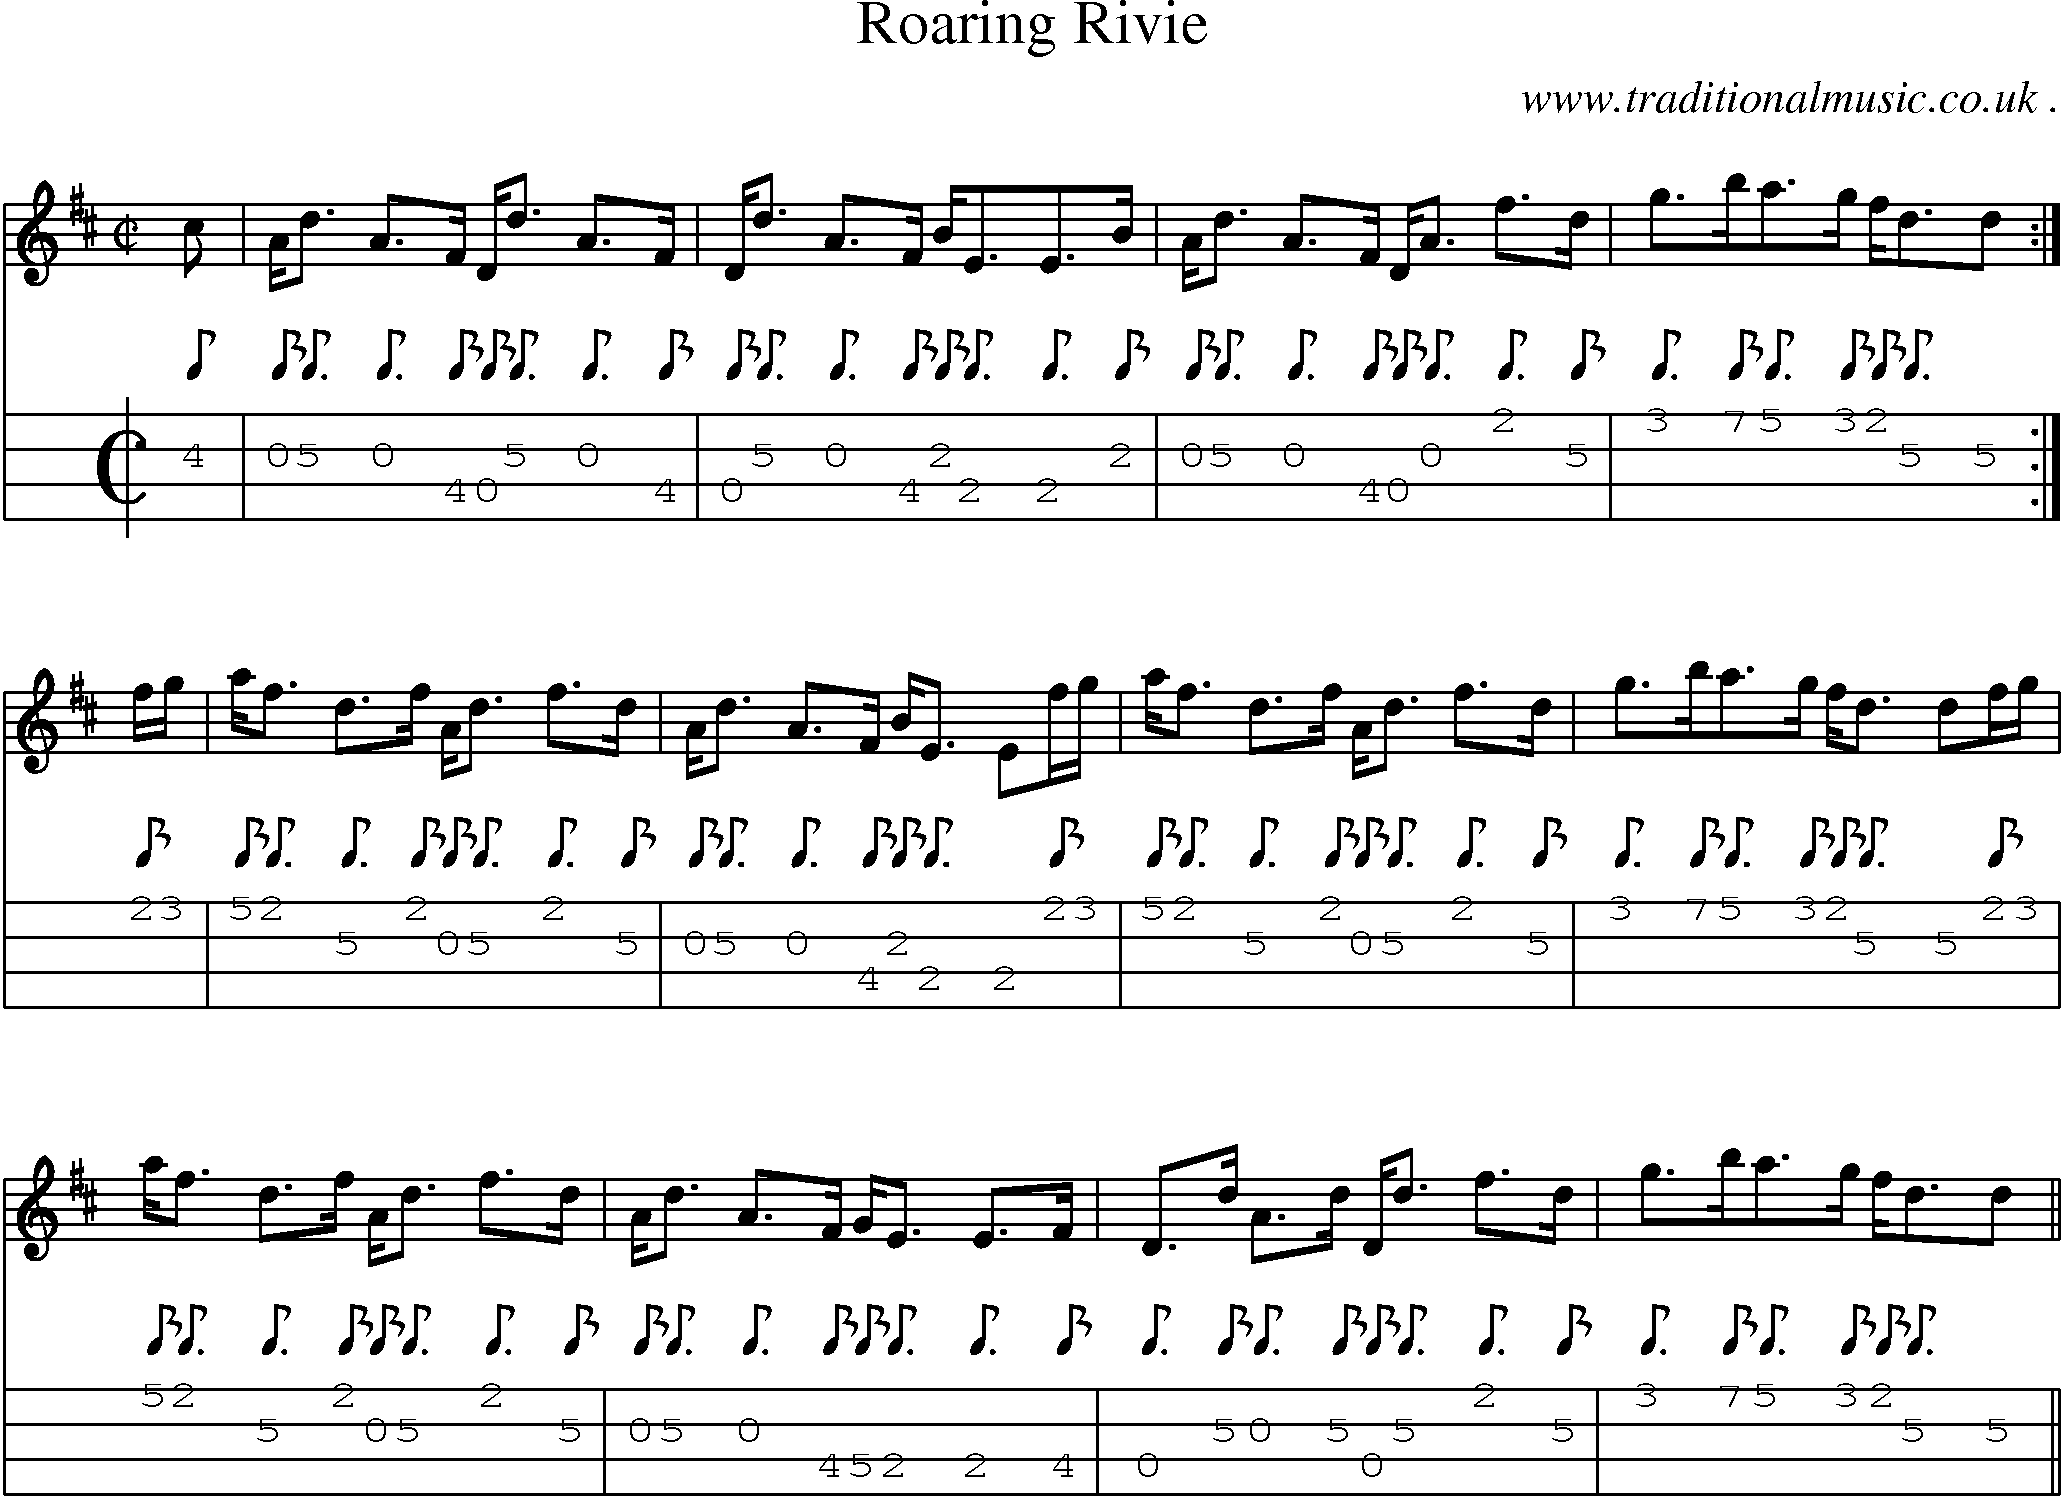 Sheet-music  score, Chords and Mandolin Tabs for Roaring Rivie